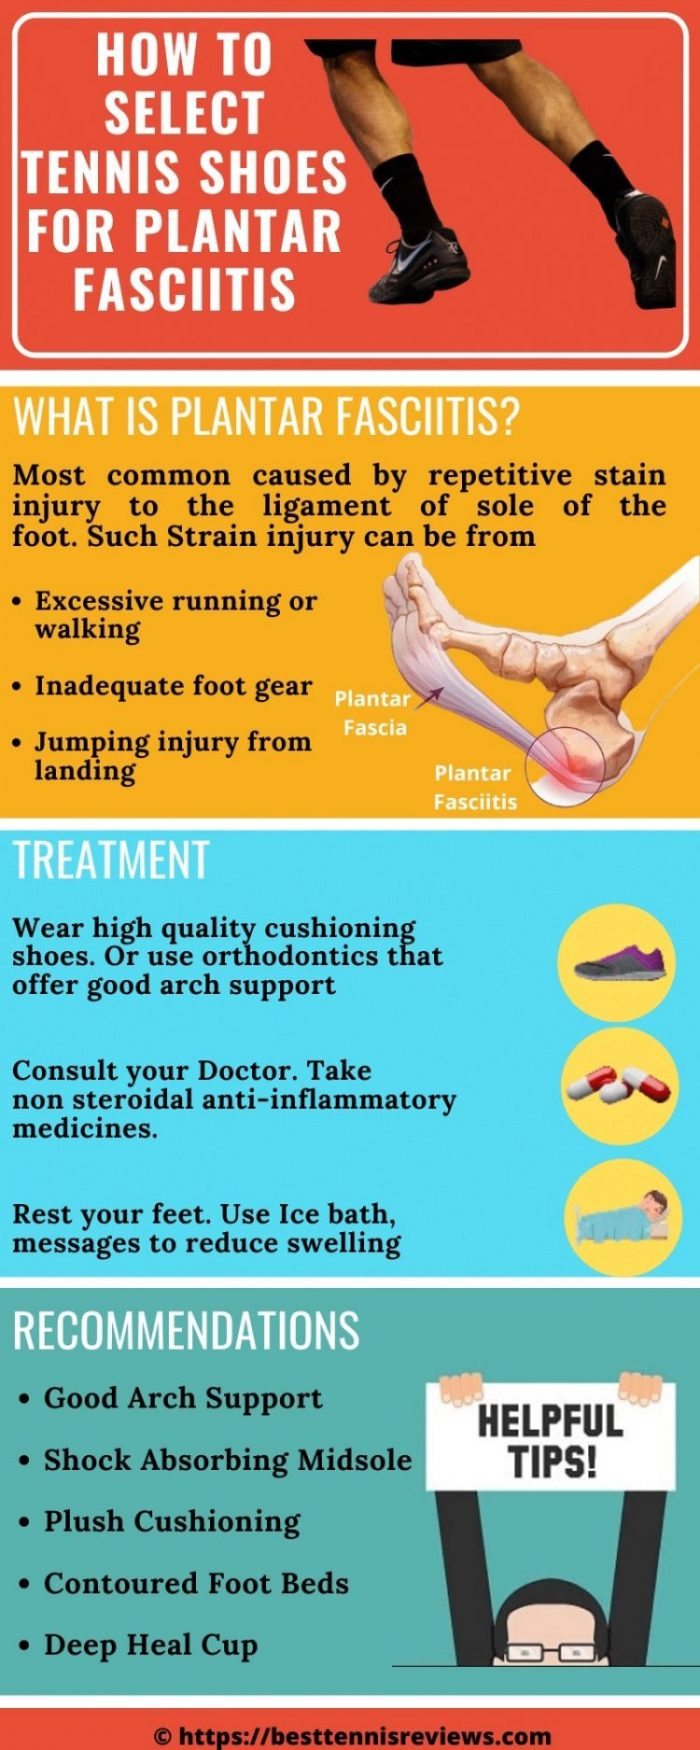 how to select tennis shoes for plantar fasciitis, how to select best tennis shoes for plantar fasciitis, how to choose tennis shoes for plantar fasciitis